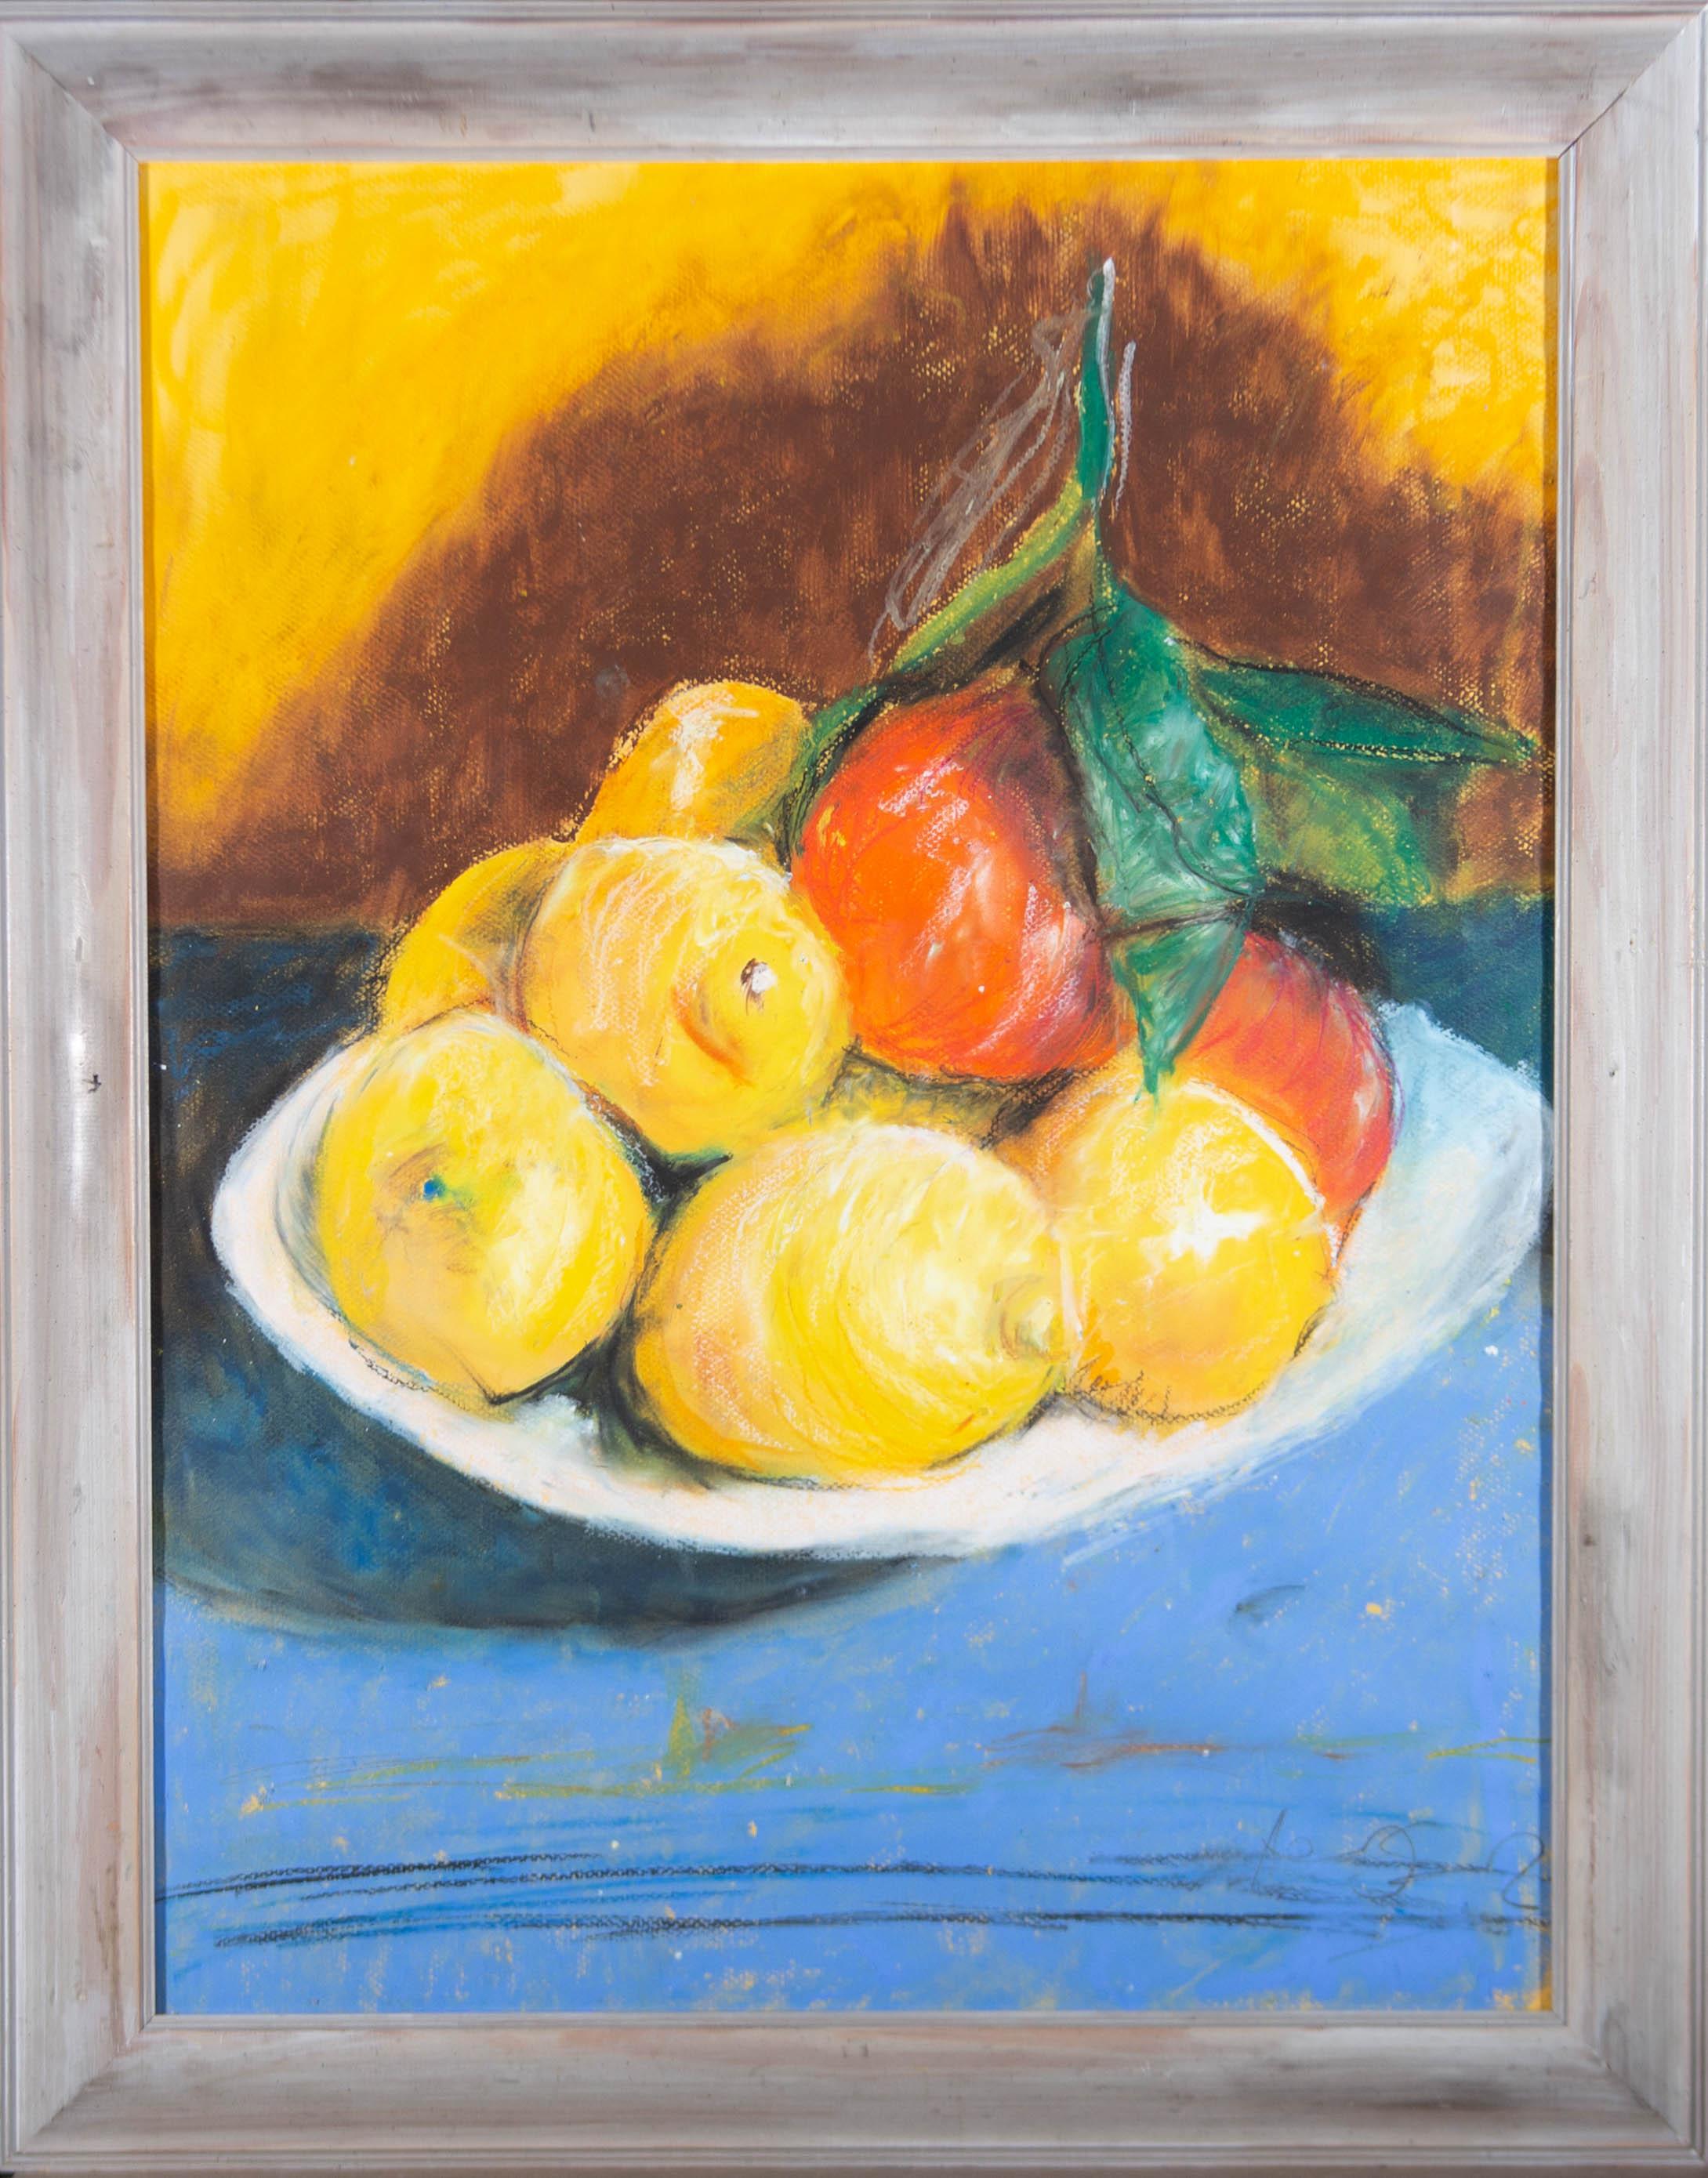 Unknown Still-Life - Framed Contemporary Oil Pastel - Lemons in a Bowl